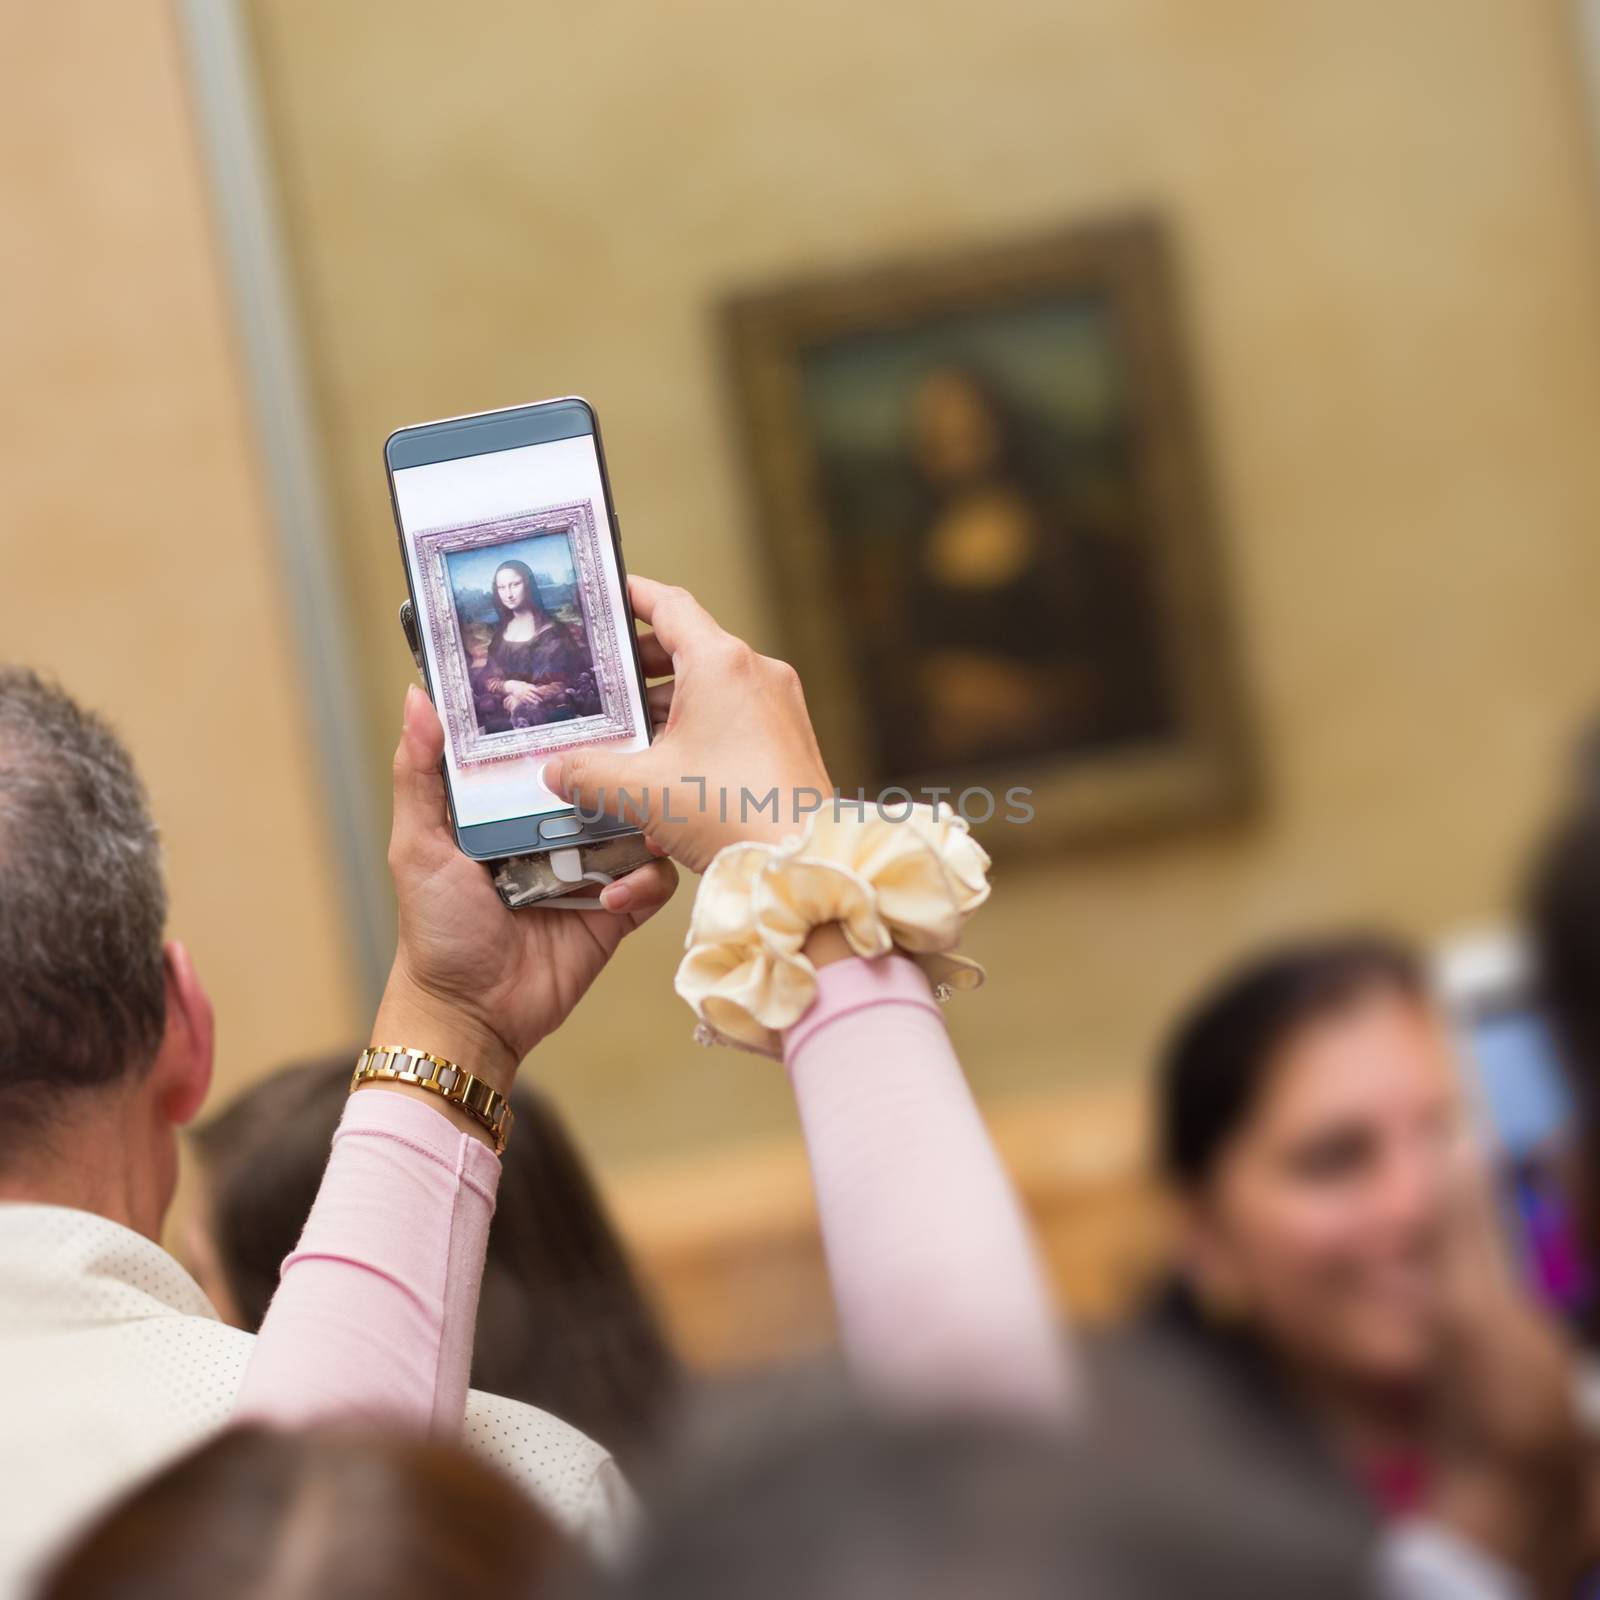 Crowd of visitors takes photos of Leonardo DaVinci's Mona Lisa, one of world's most famous work of art, at Louvre Museum in Paris, France.